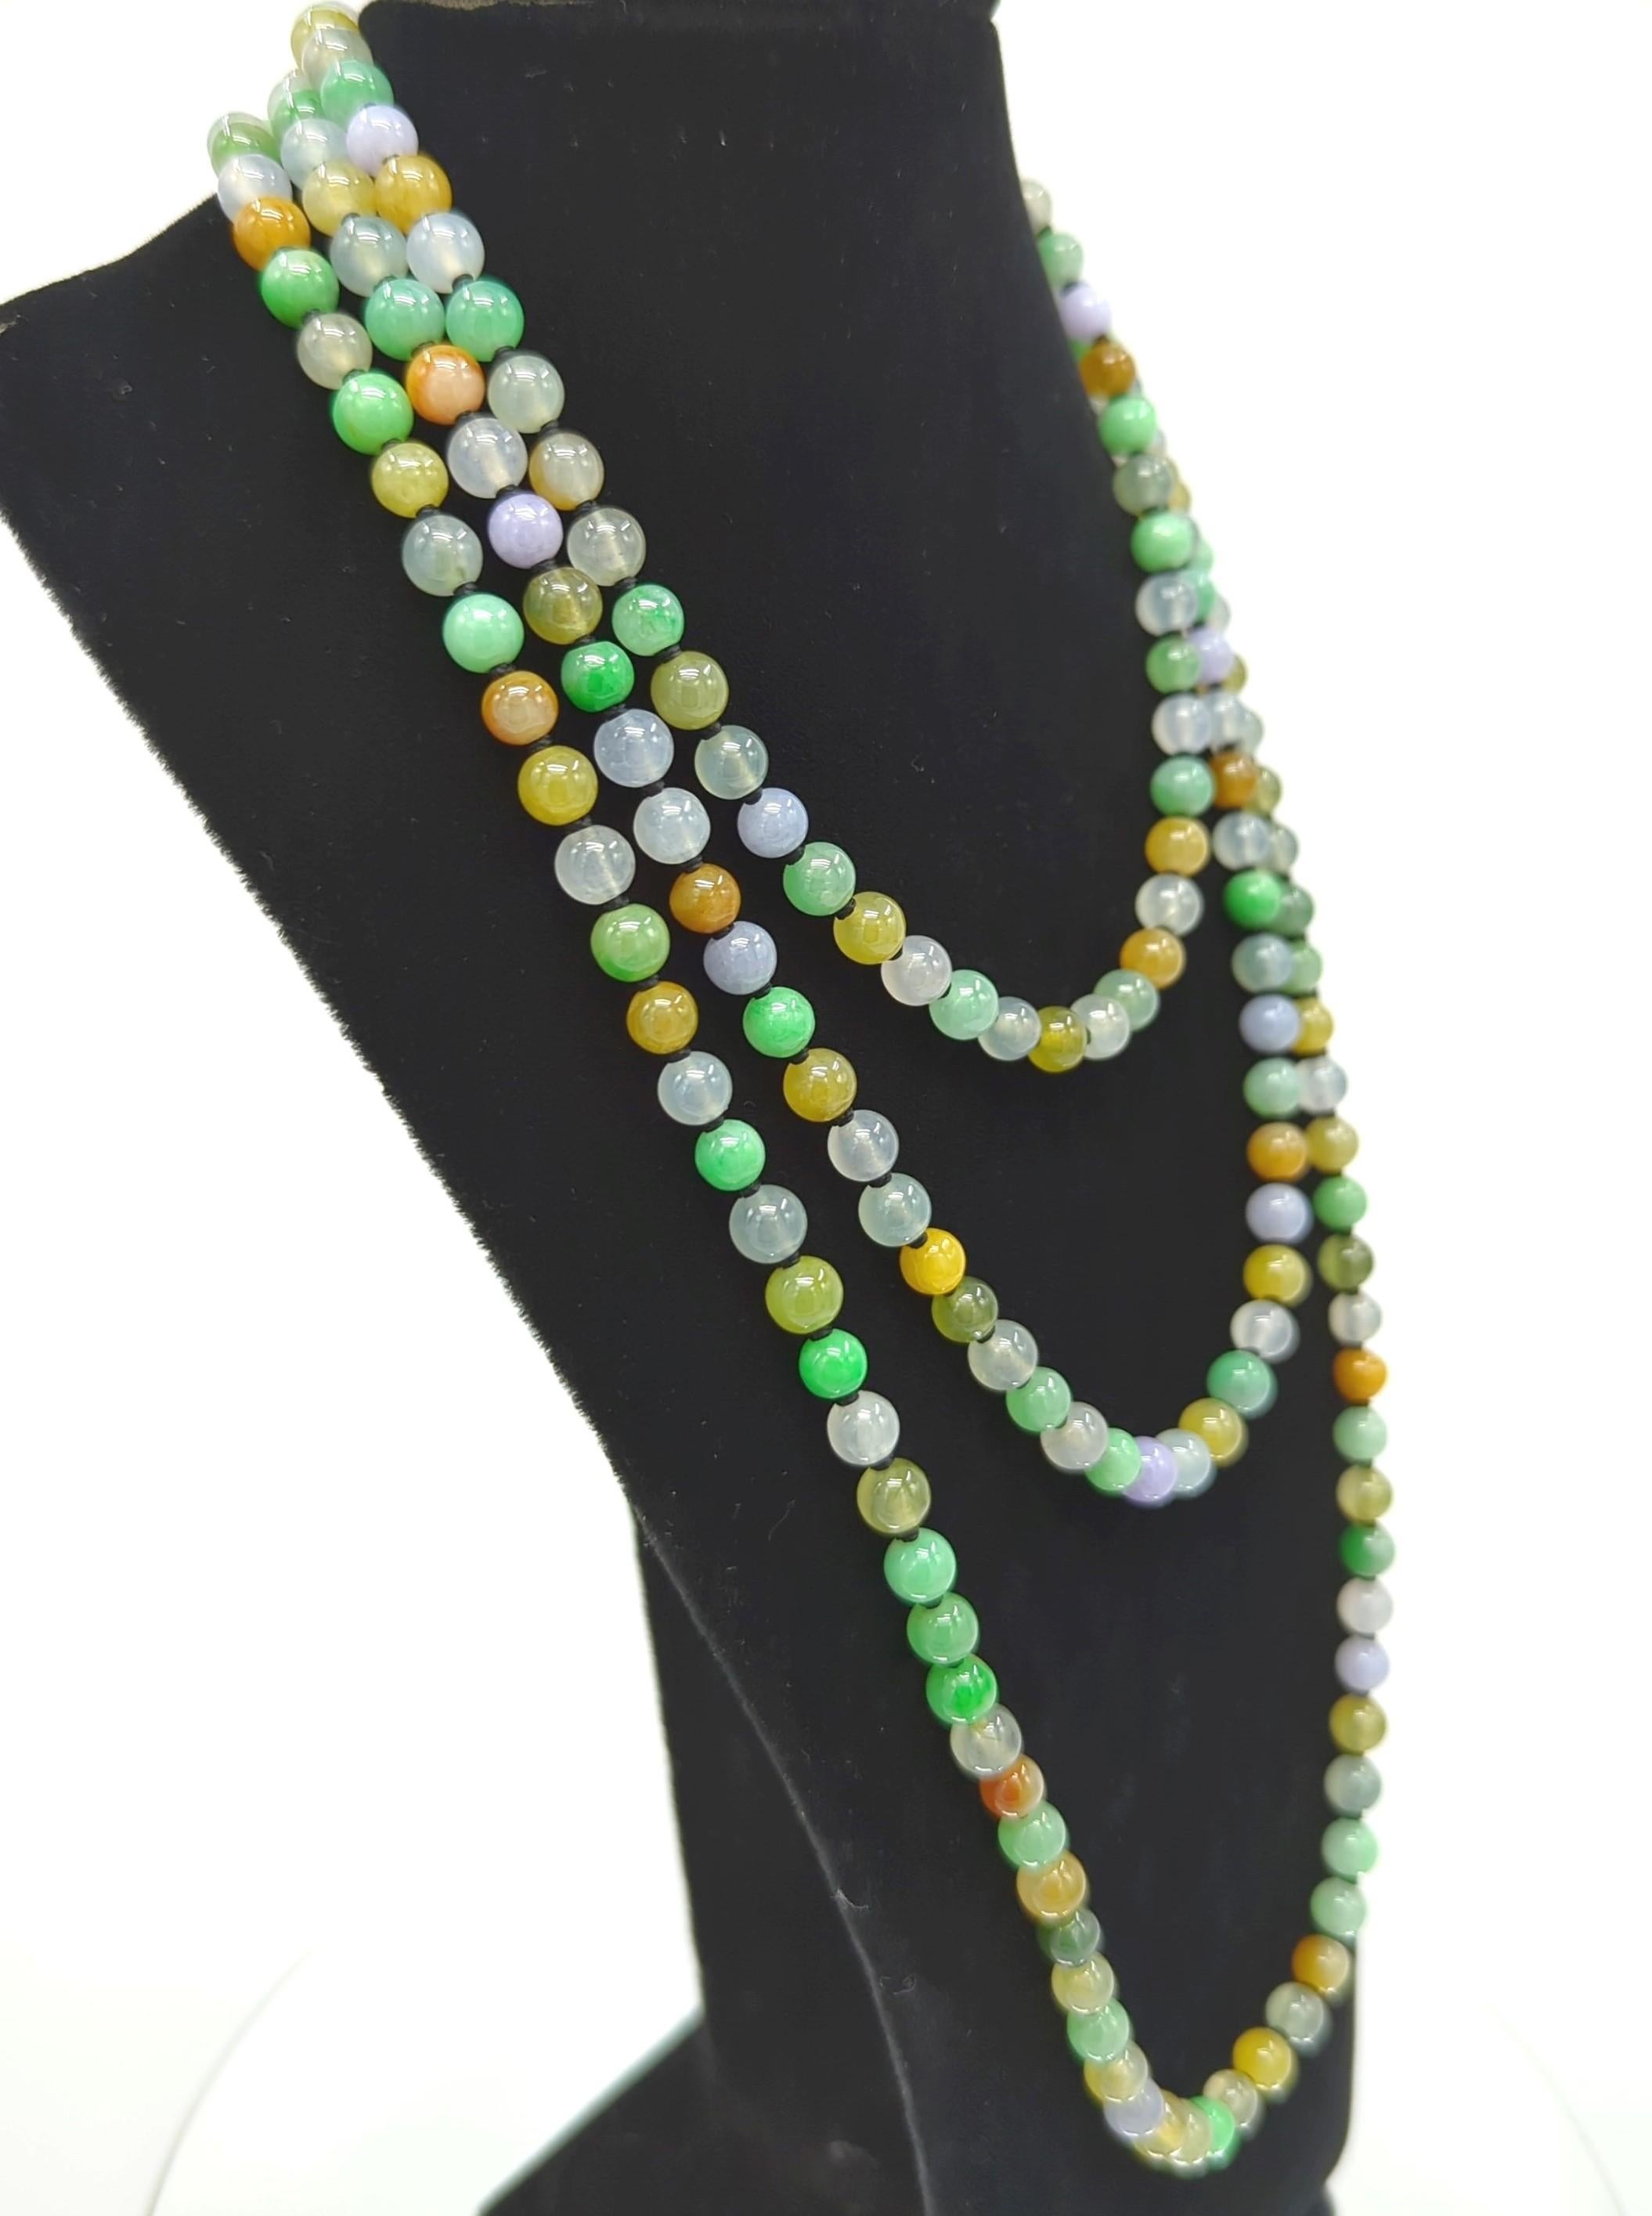 Exquisite Multicolor Icy Jadeite A-Grade 200 Beads Necklace Very Long Strand 52" For Sale